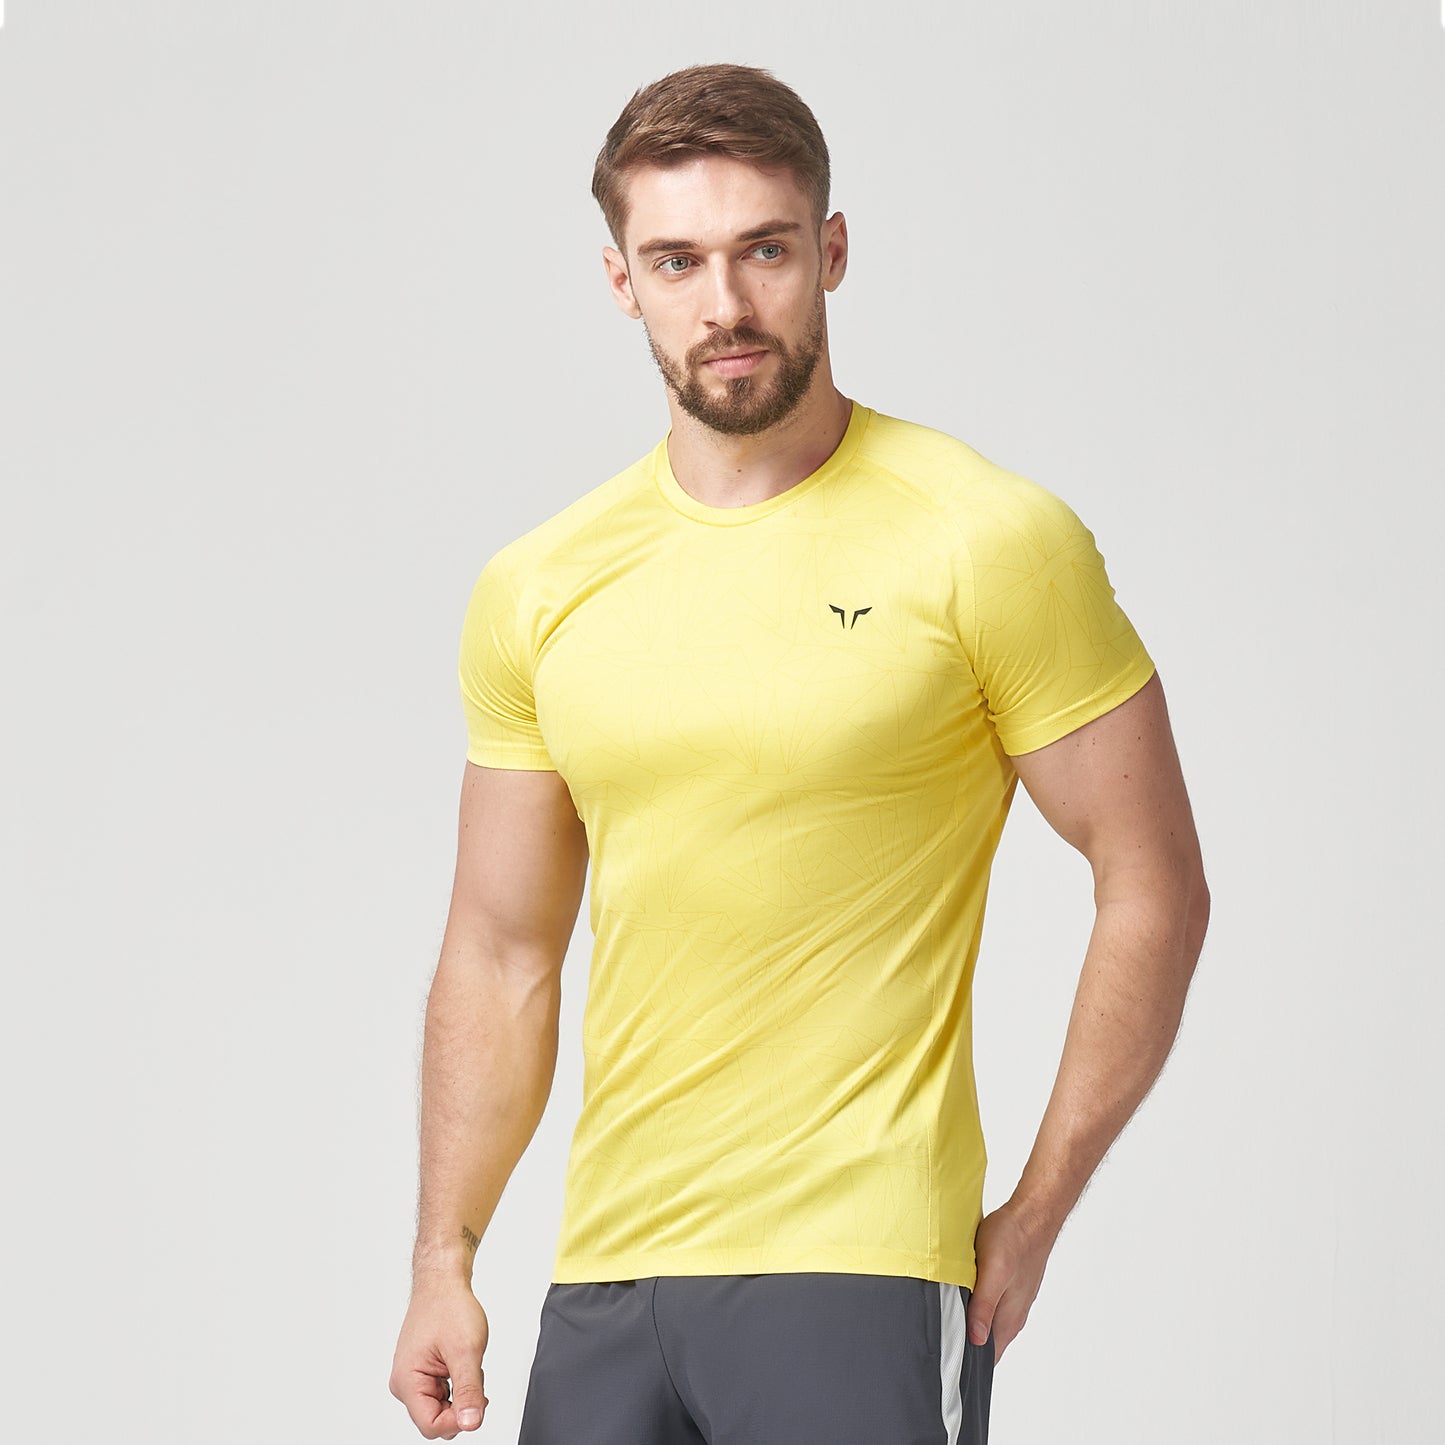 squatwolf-gym-wear-lab360-power-tee-yellow-workout-shirts-for-men